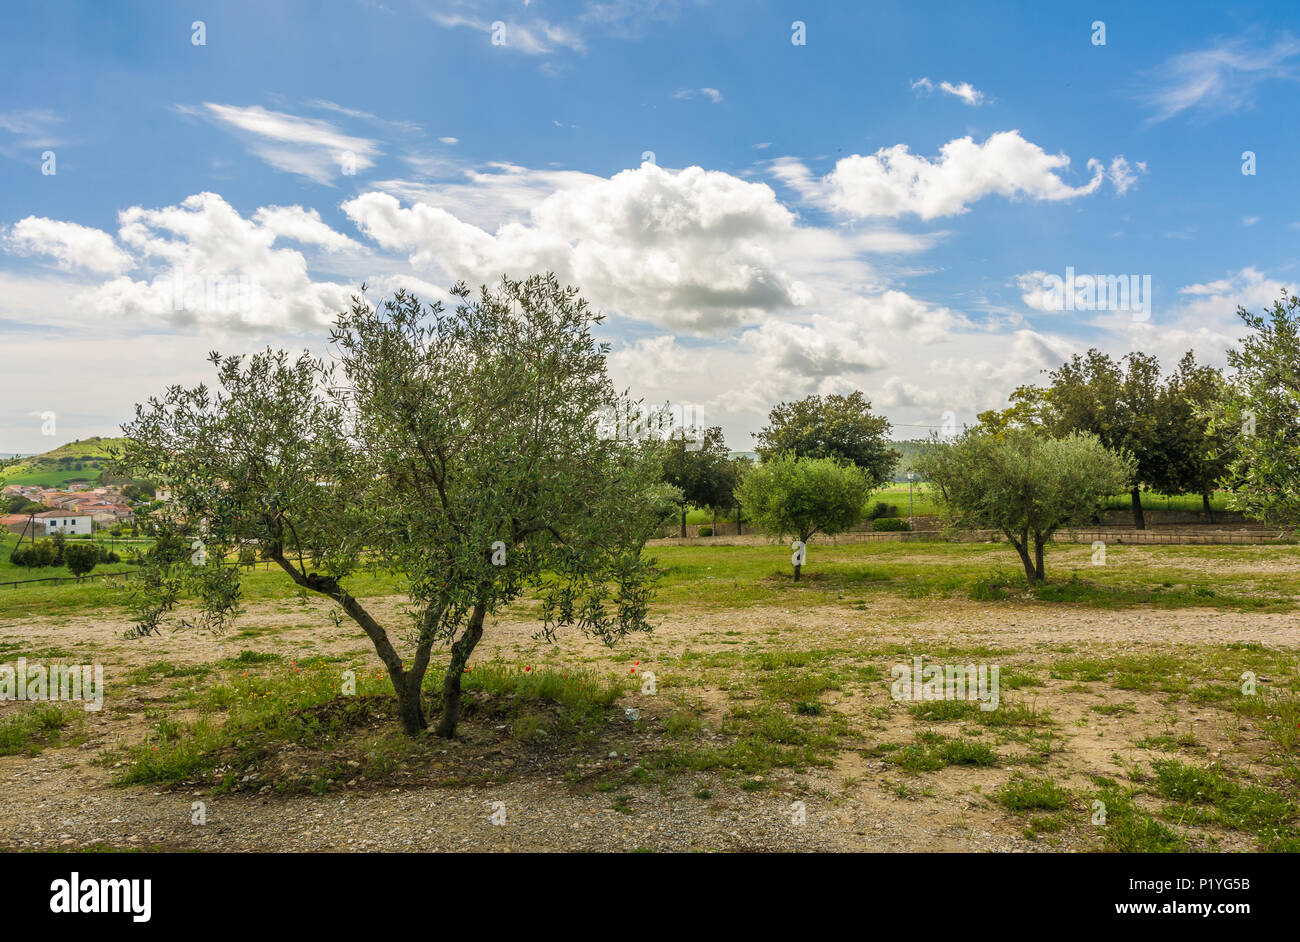 view of Marmilla Region. Marmilla is a natural region of southern-central Sardinia, Italy. Stock Photo